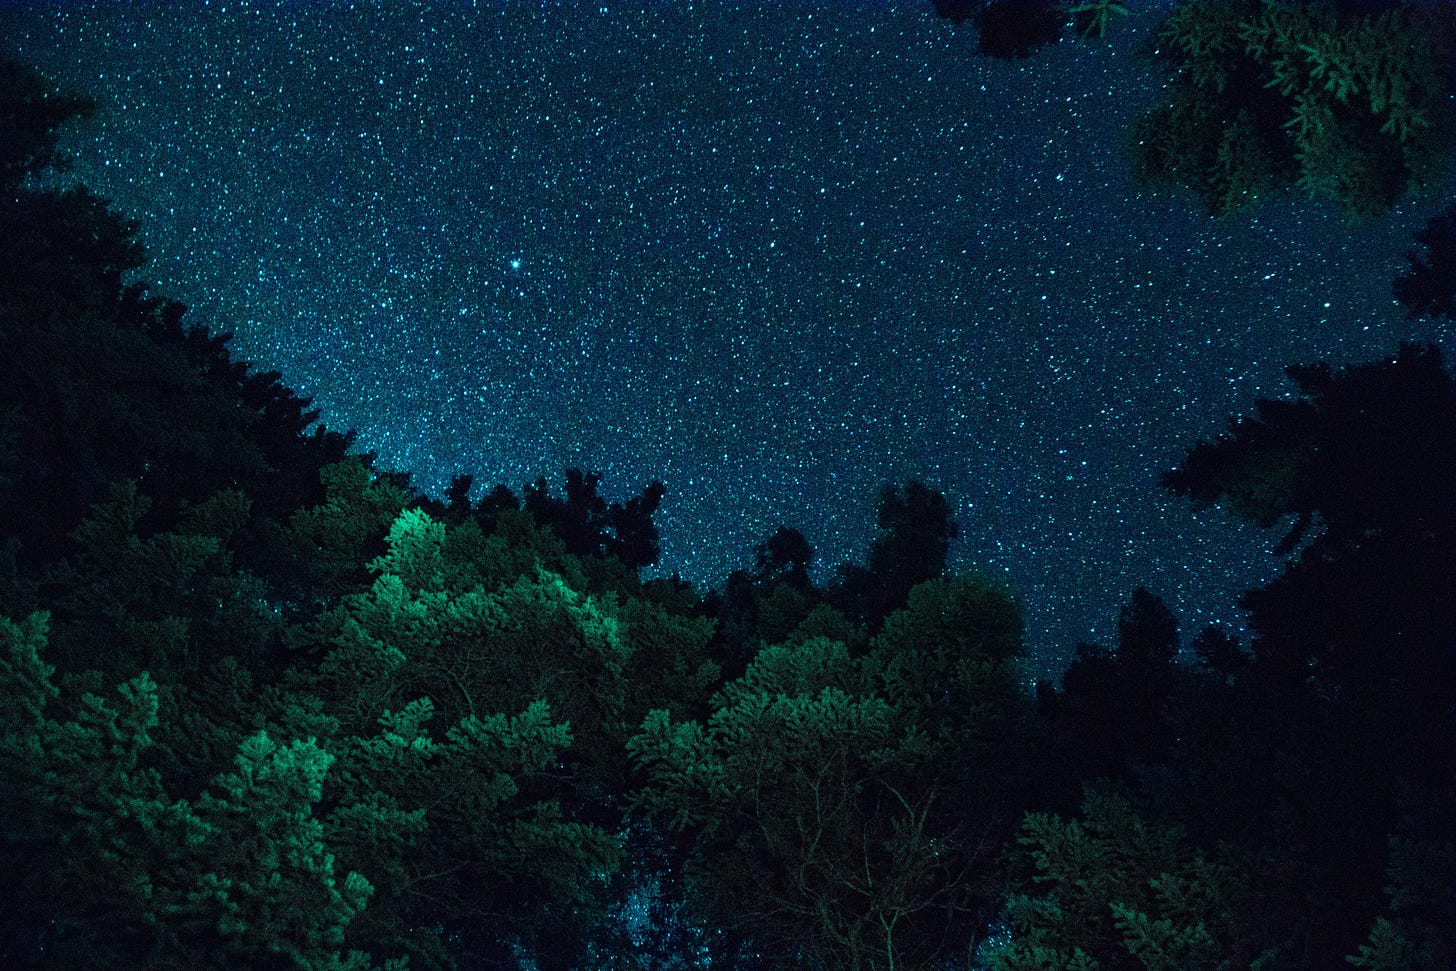 Night sky speckled with stars as seen through the tops of trees in a forest